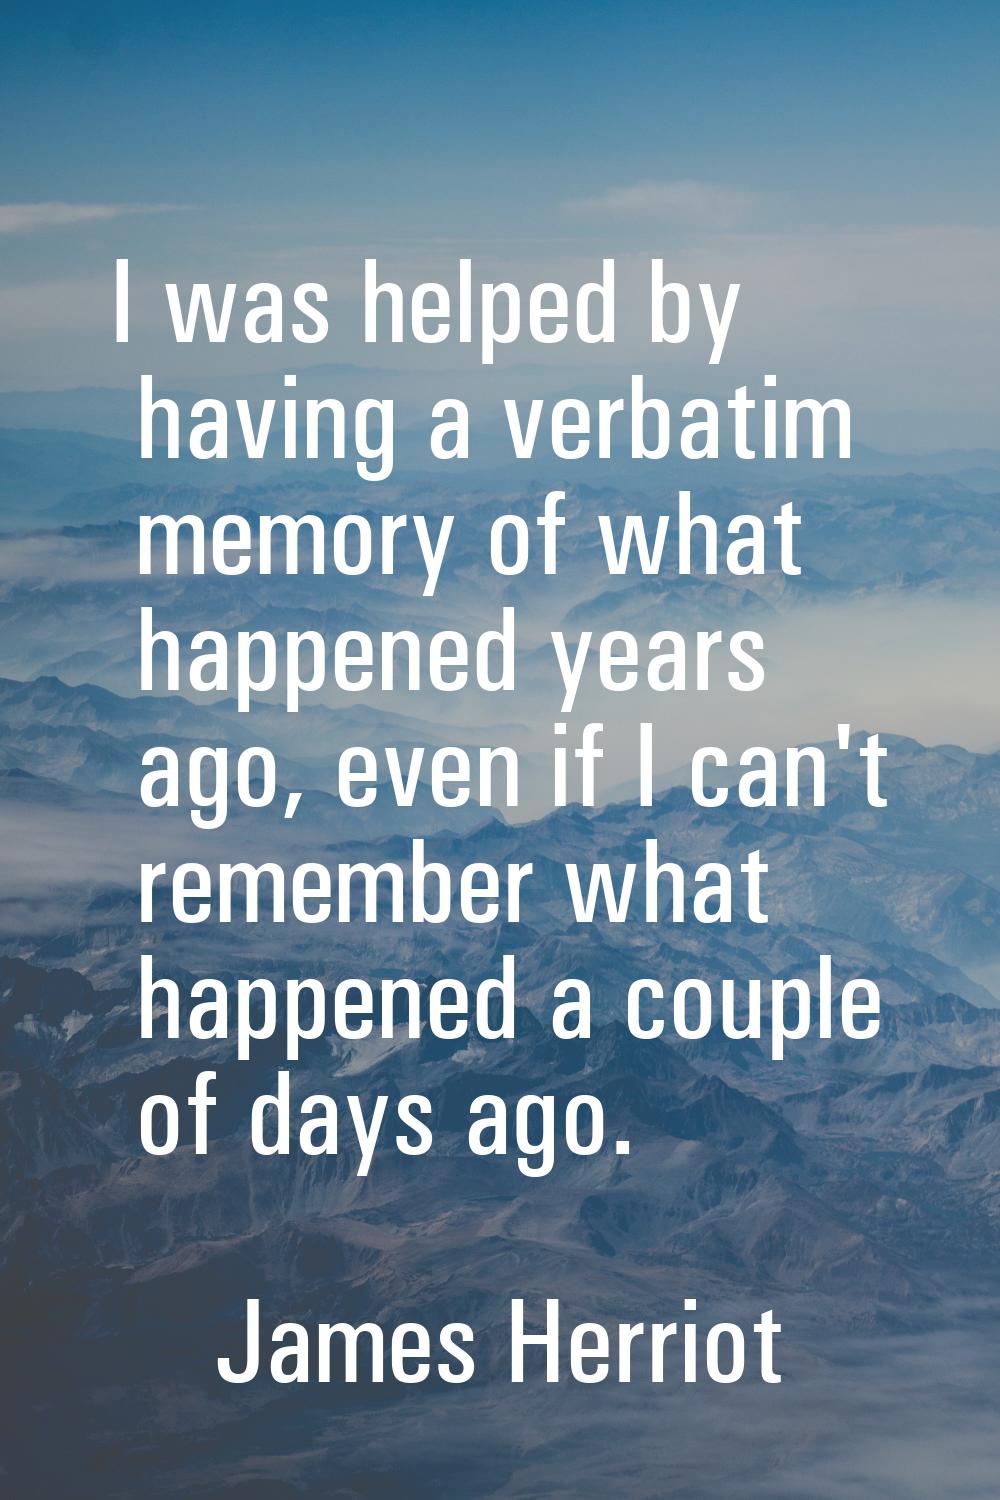 I was helped by having a verbatim memory of what happened years ago, even if I can't remember what 